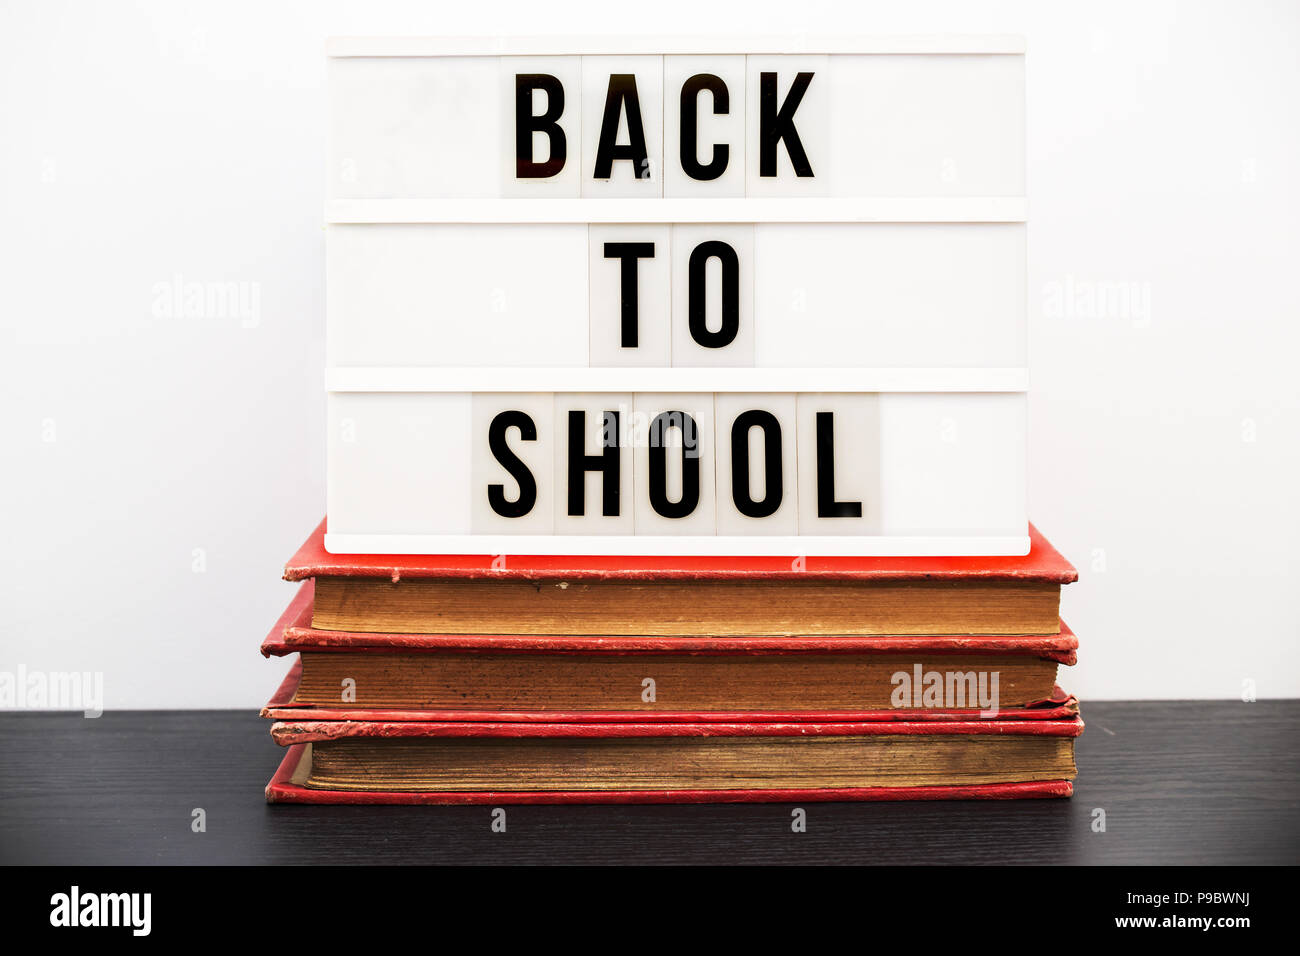 Back to school written in a light box on top of a pile of old  books Stock Photo